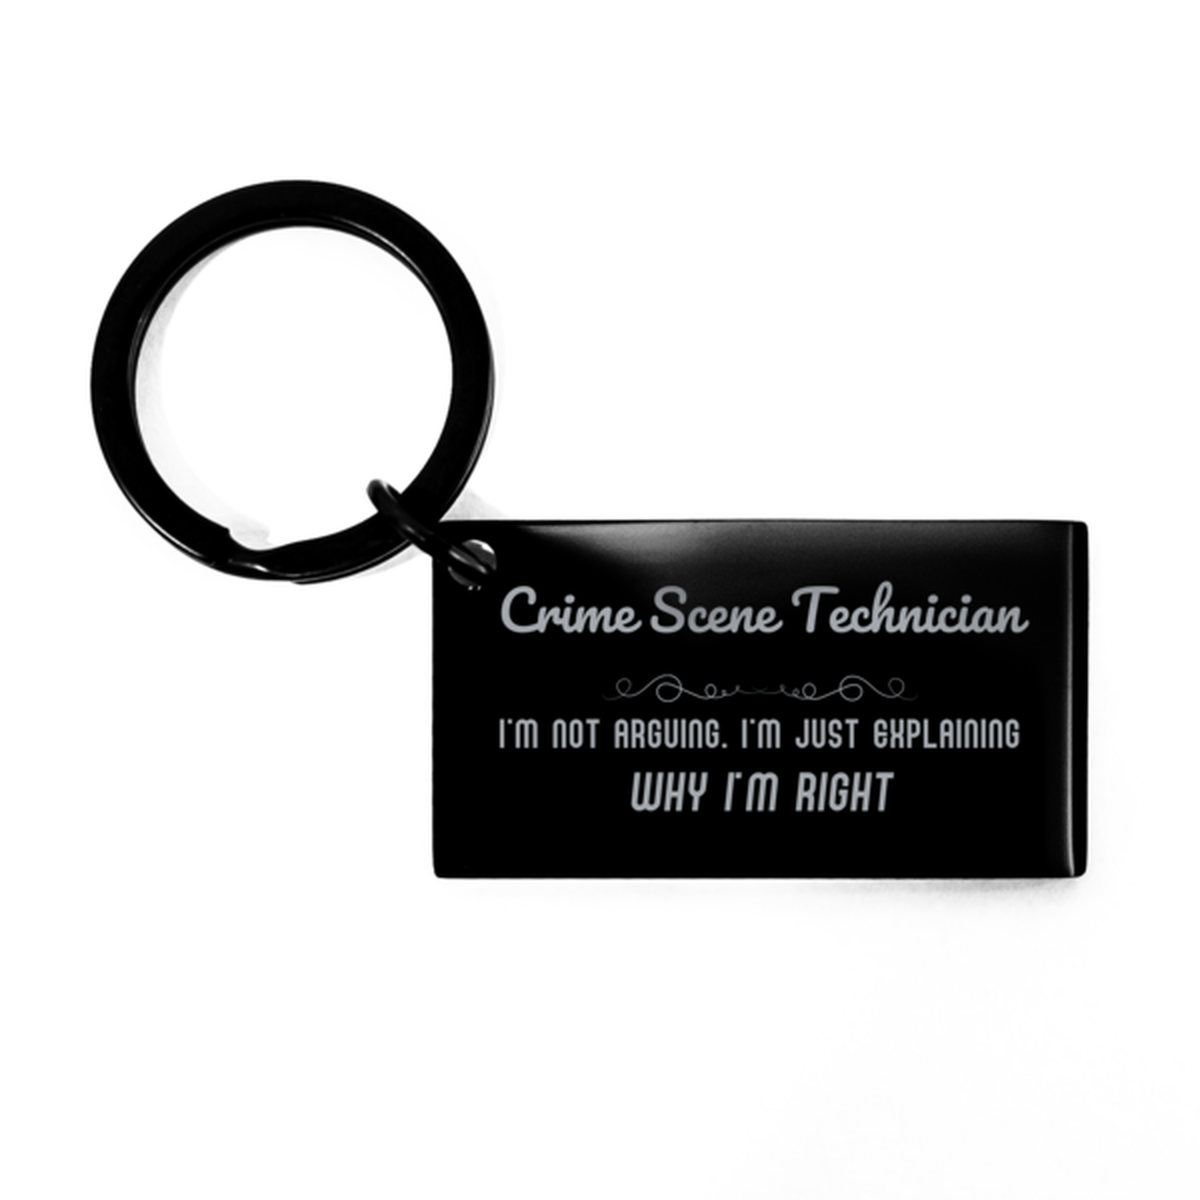 Crime Scene Technician I'm not Arguing. I'm Just Explaining Why I'm RIGHT Keychain, Funny Saying Quote Crime Scene Technician Gifts For Crime Scene Technician Graduation Birthday Christmas Gifts for Men Women Coworker